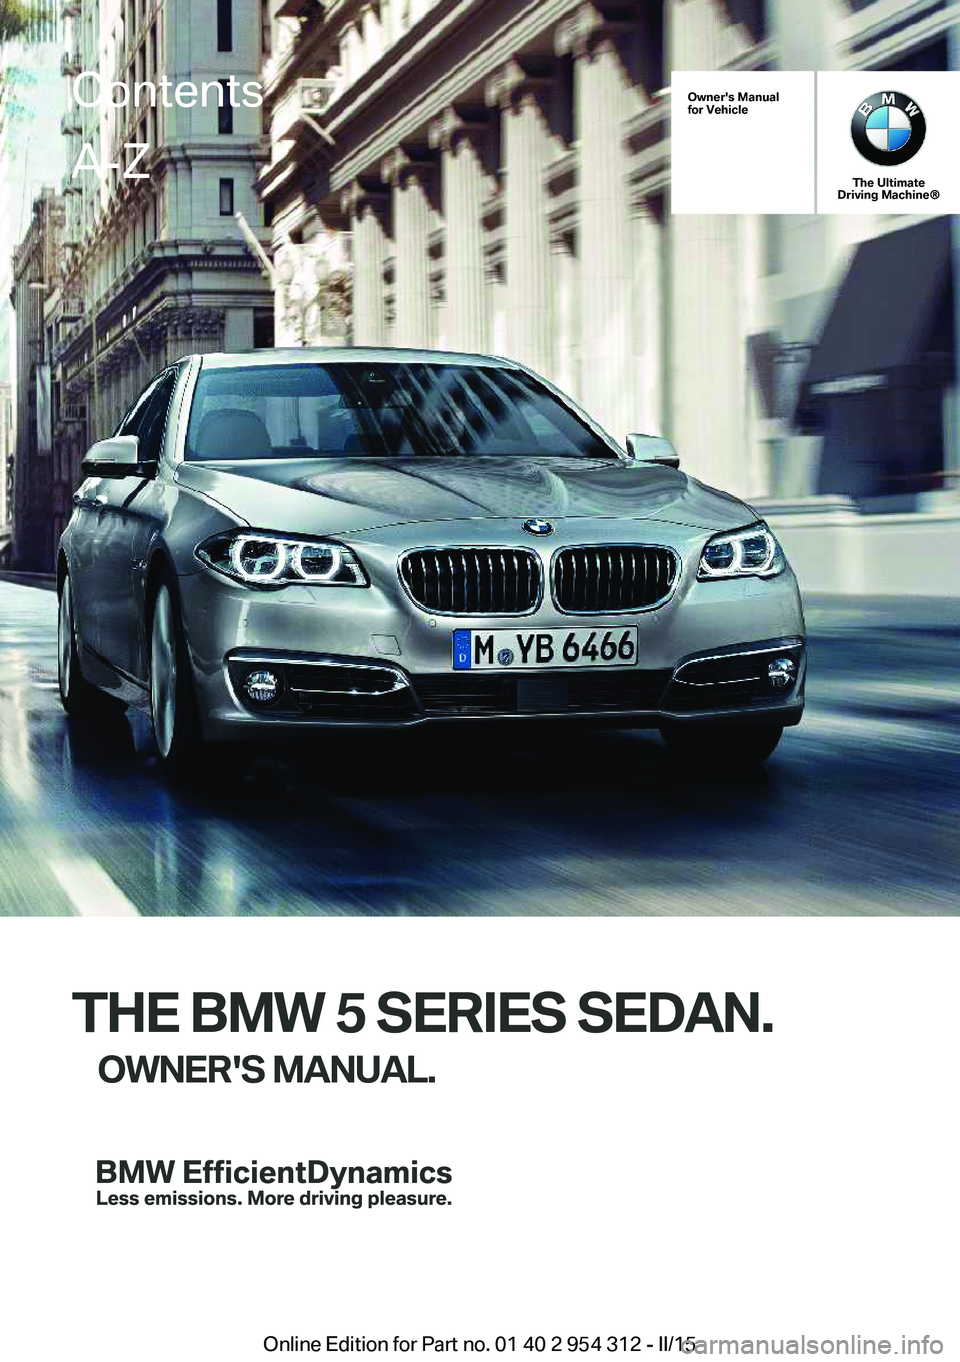 BMW 5 SERIES SEDAN 2015  Owners Manual Owner's Manual
for Vehicle
The Ultimate
Driving Machine®
THE BMW 5 SERIES SEDAN.
OWNER'S MANUAL.
ContentsA-Z
Online Edition for Part no. 01 40 2 954 312 - II/15   